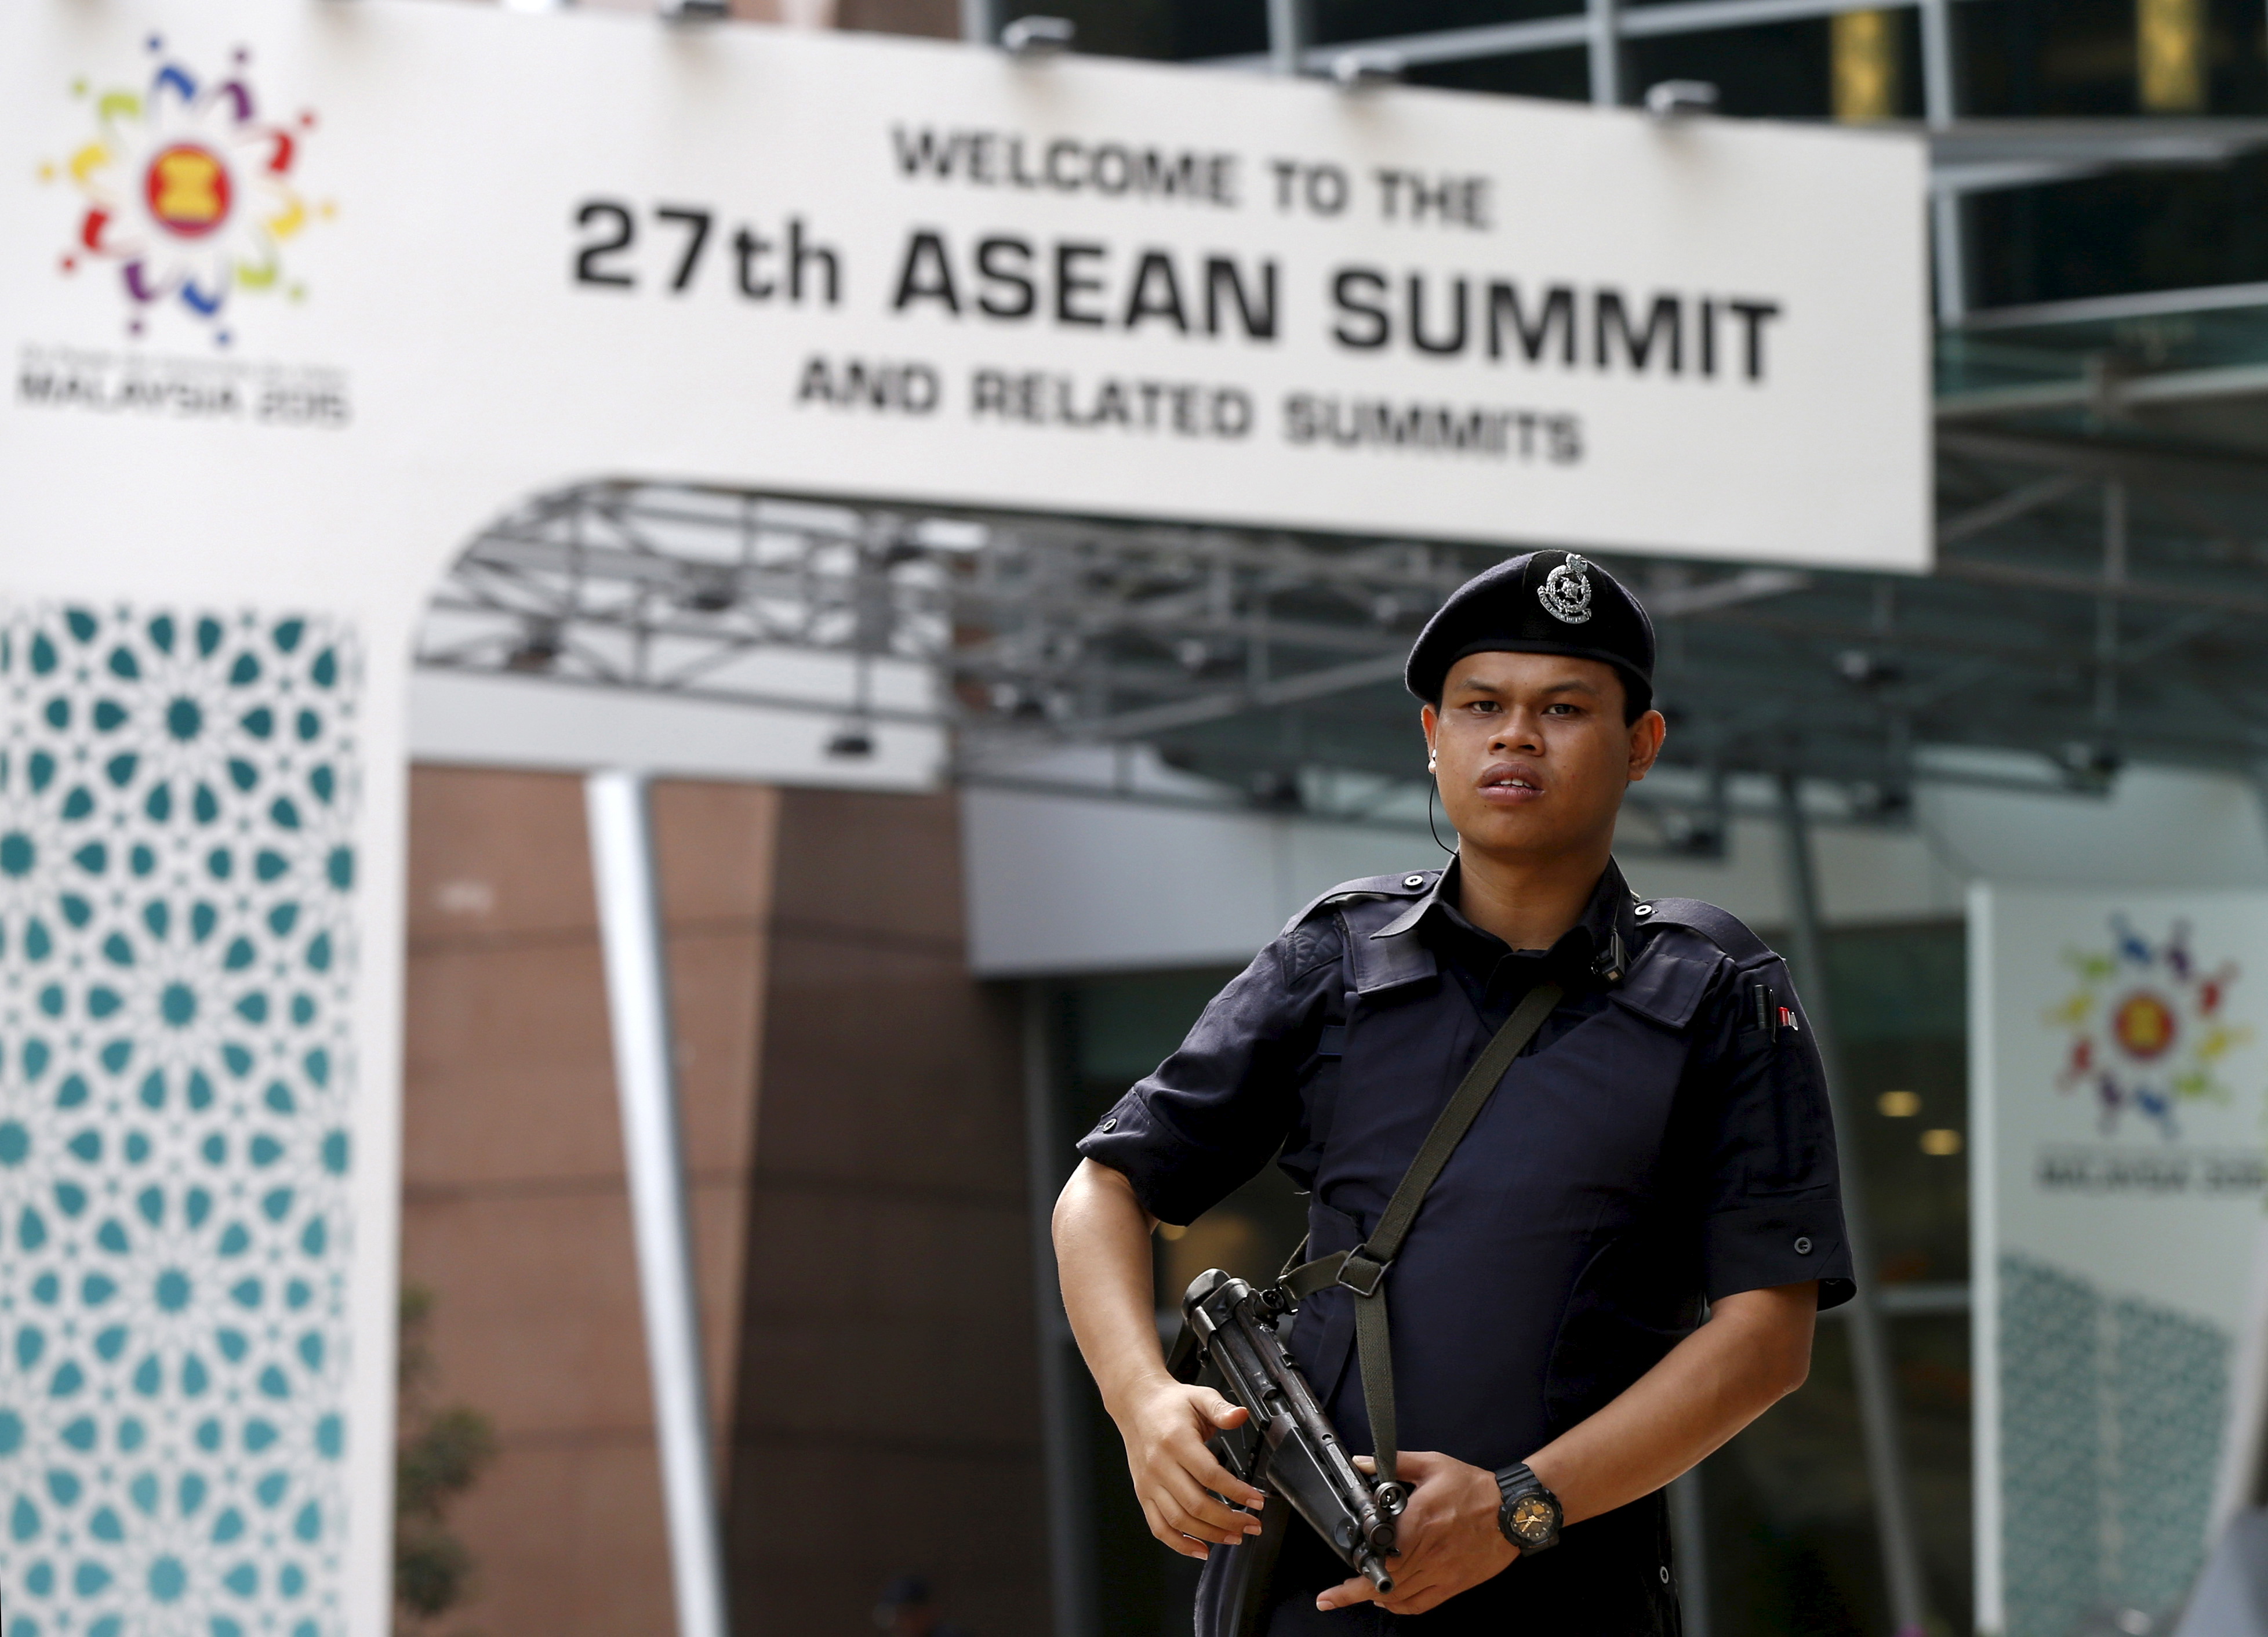 A police officer patrols outside the venue for the 27th Association of Southeast Asian Nations (ASEAN) summit in Kuala Lumpur on Nov. 20, 2015 (Olivia Harris—Reuters)